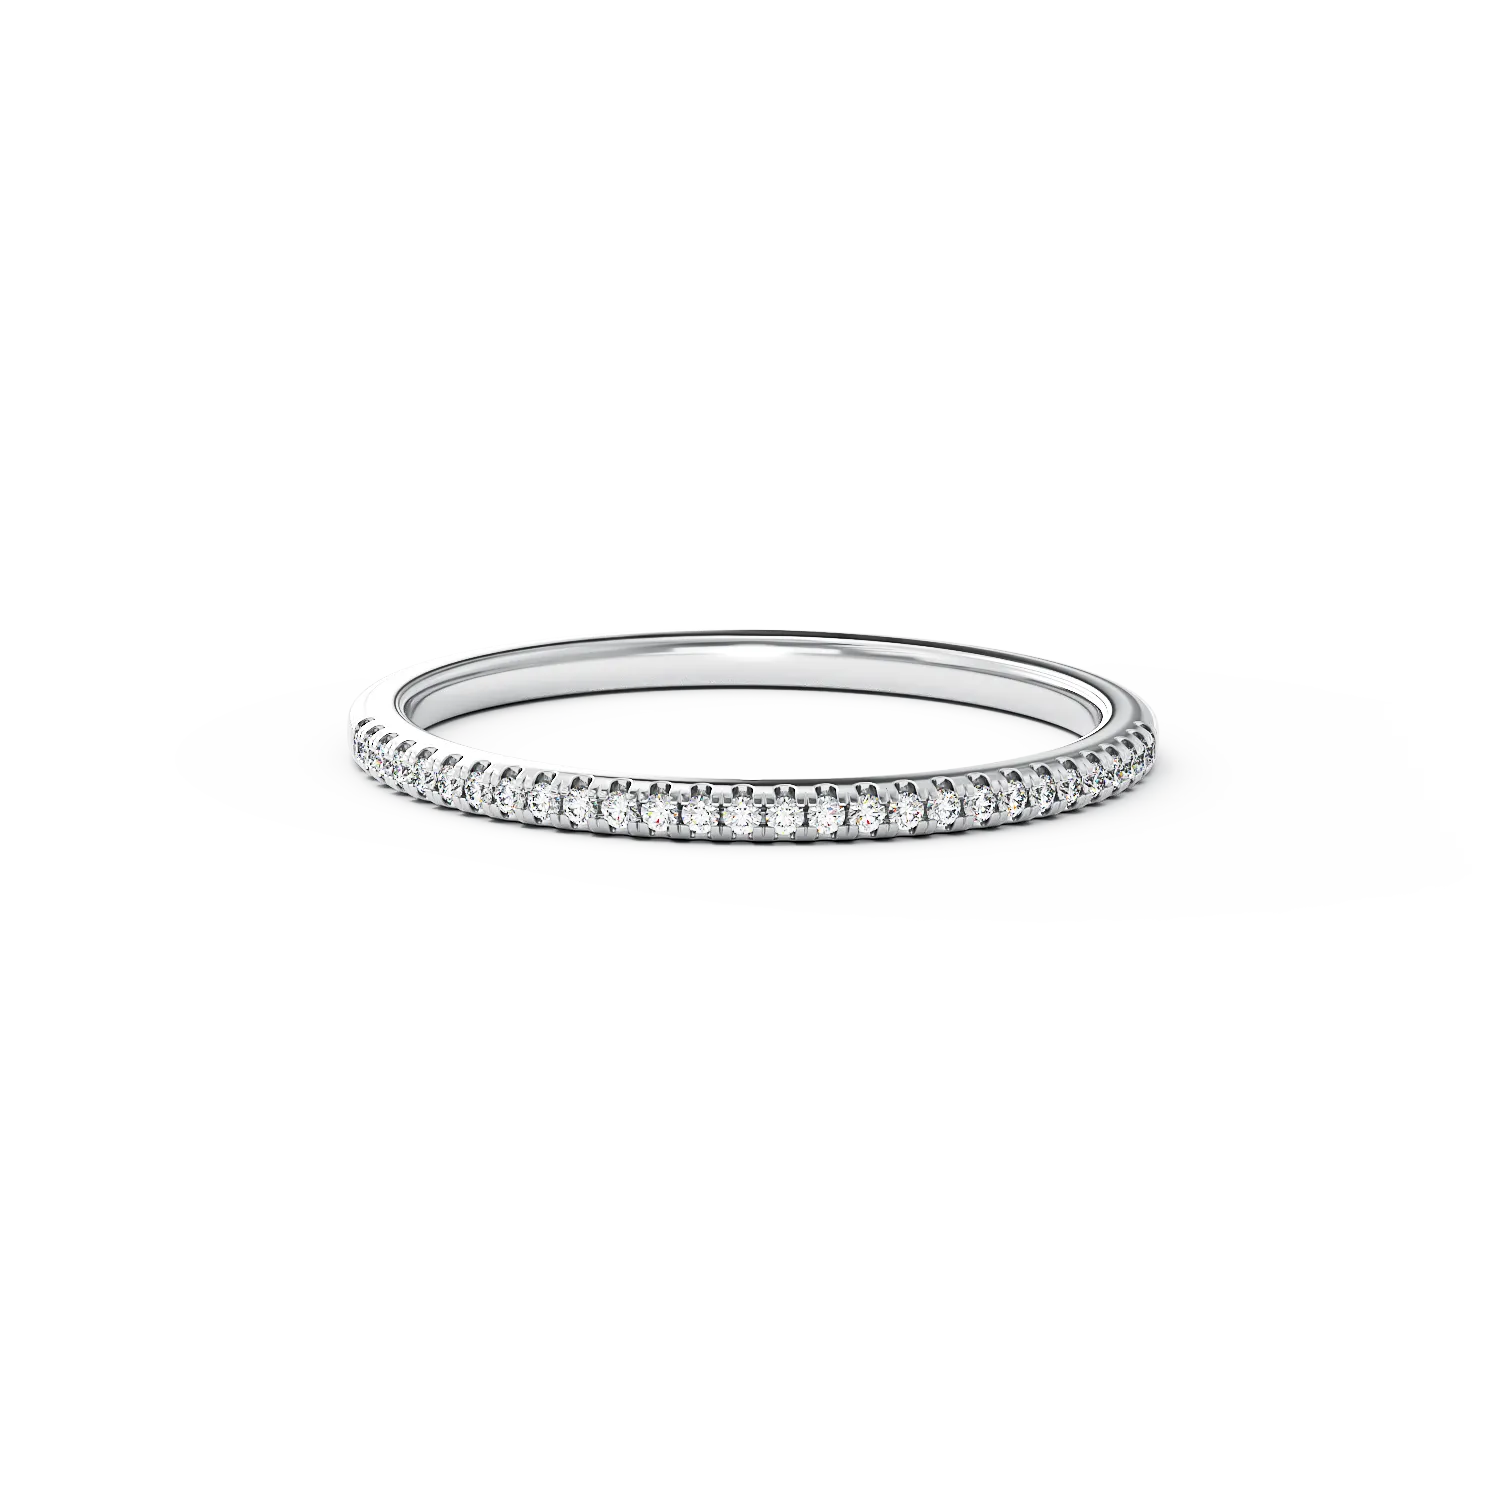 Half eternity ring in white gold with 0.07ct diamonds